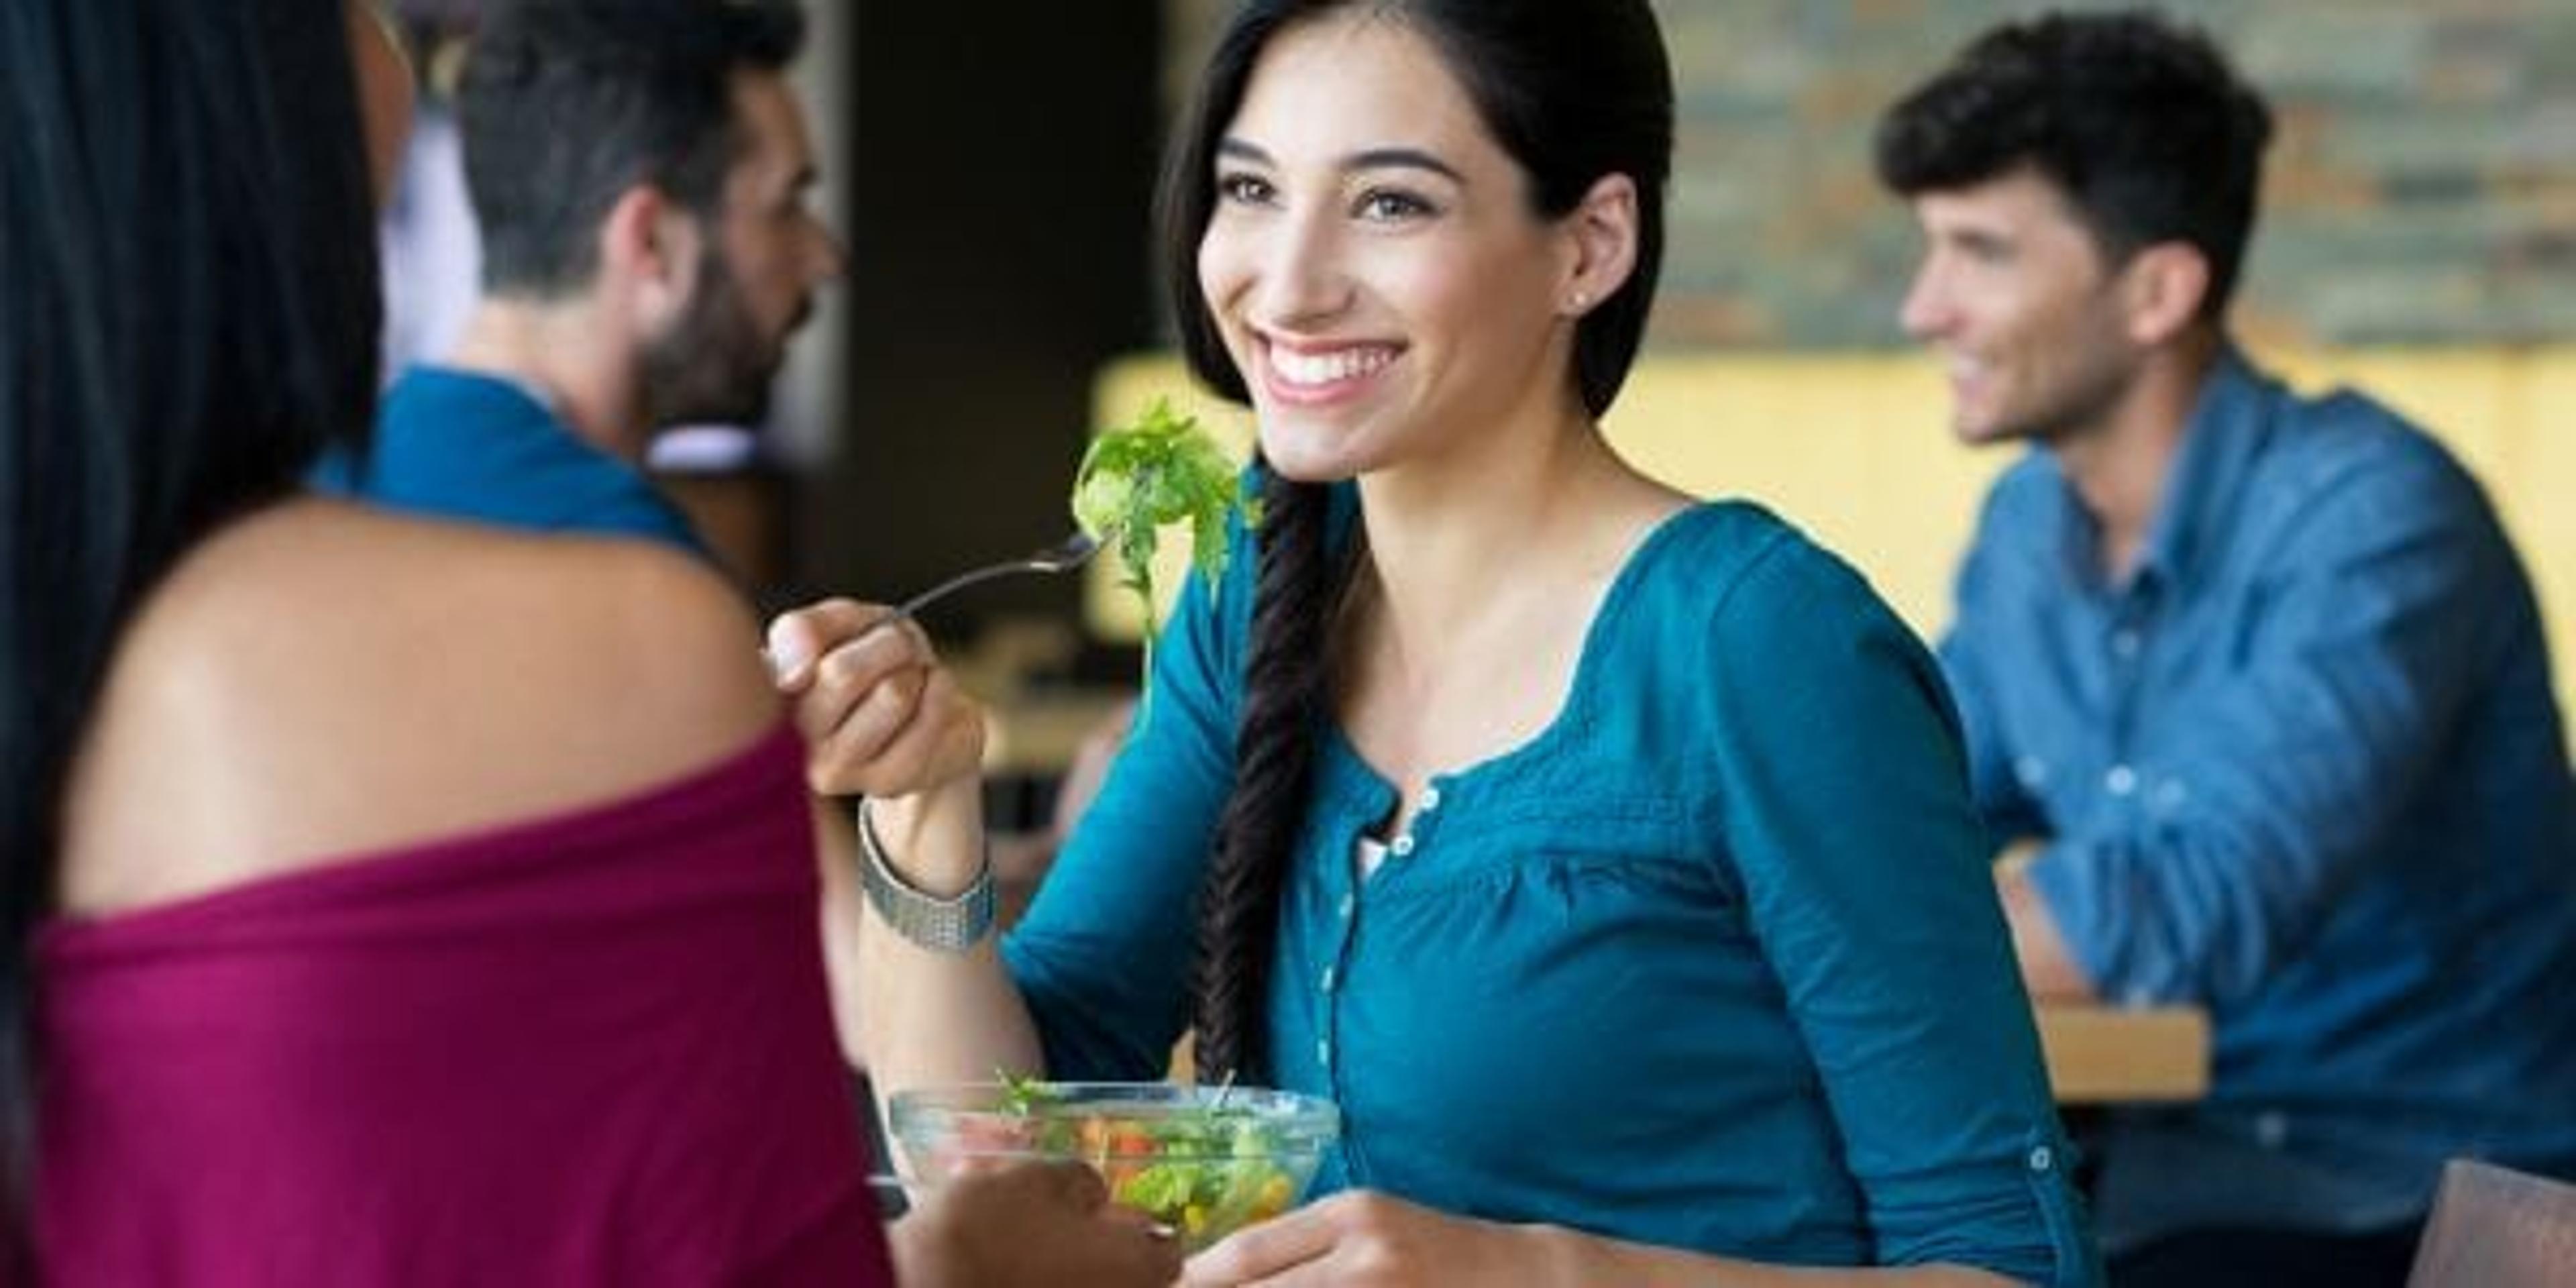 Young woman eating at a restaurant with a friend.